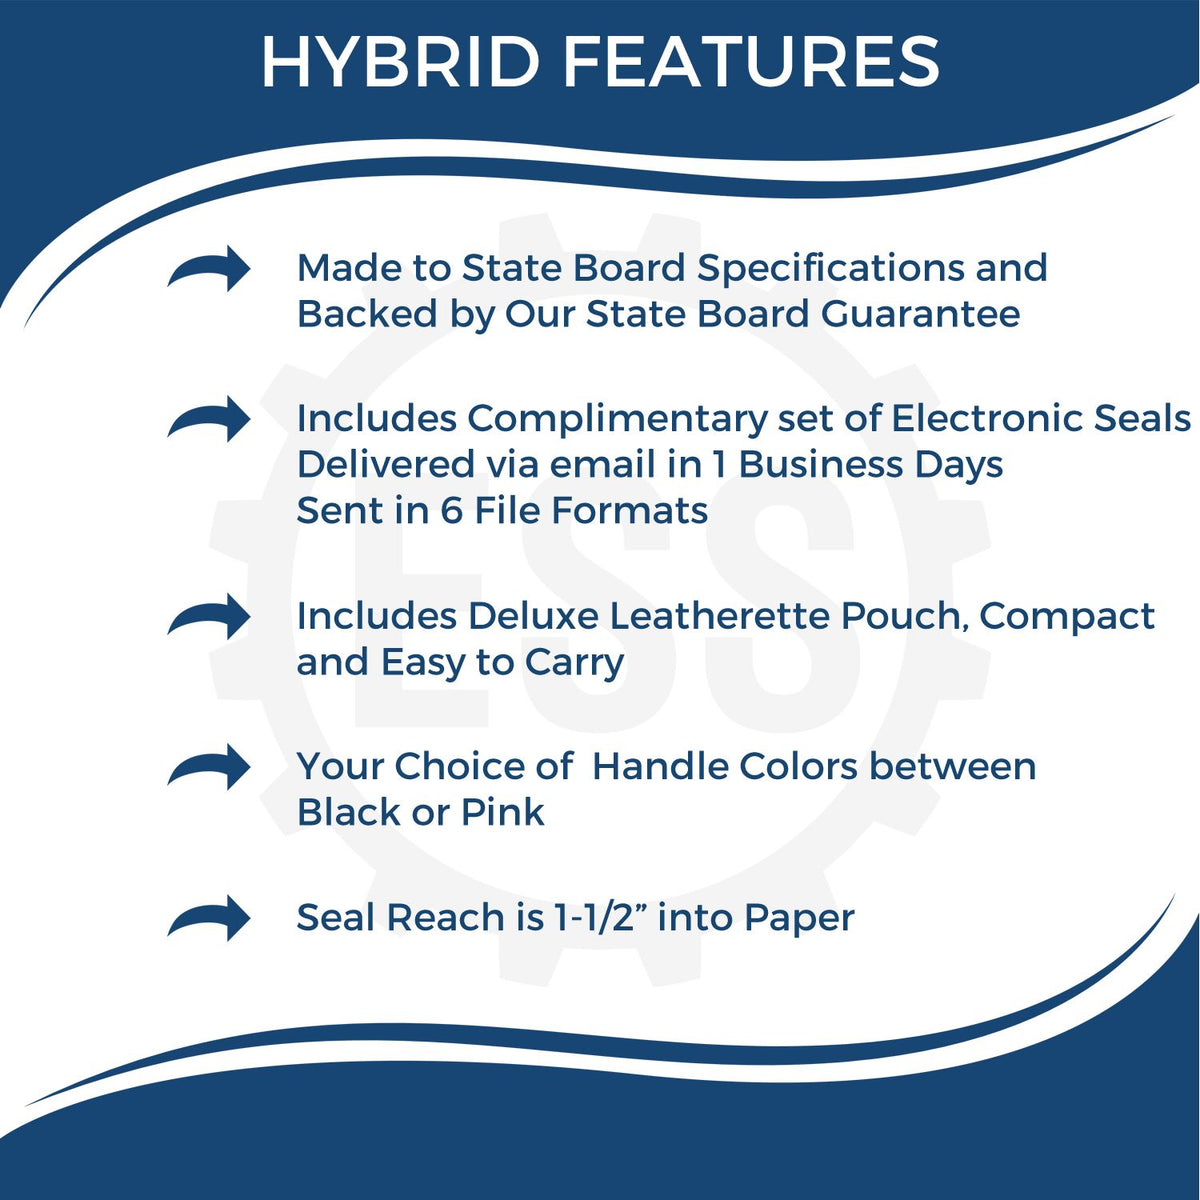 A picture of an infographic highlighting the selling points for the Hybrid New York Engineer Seal